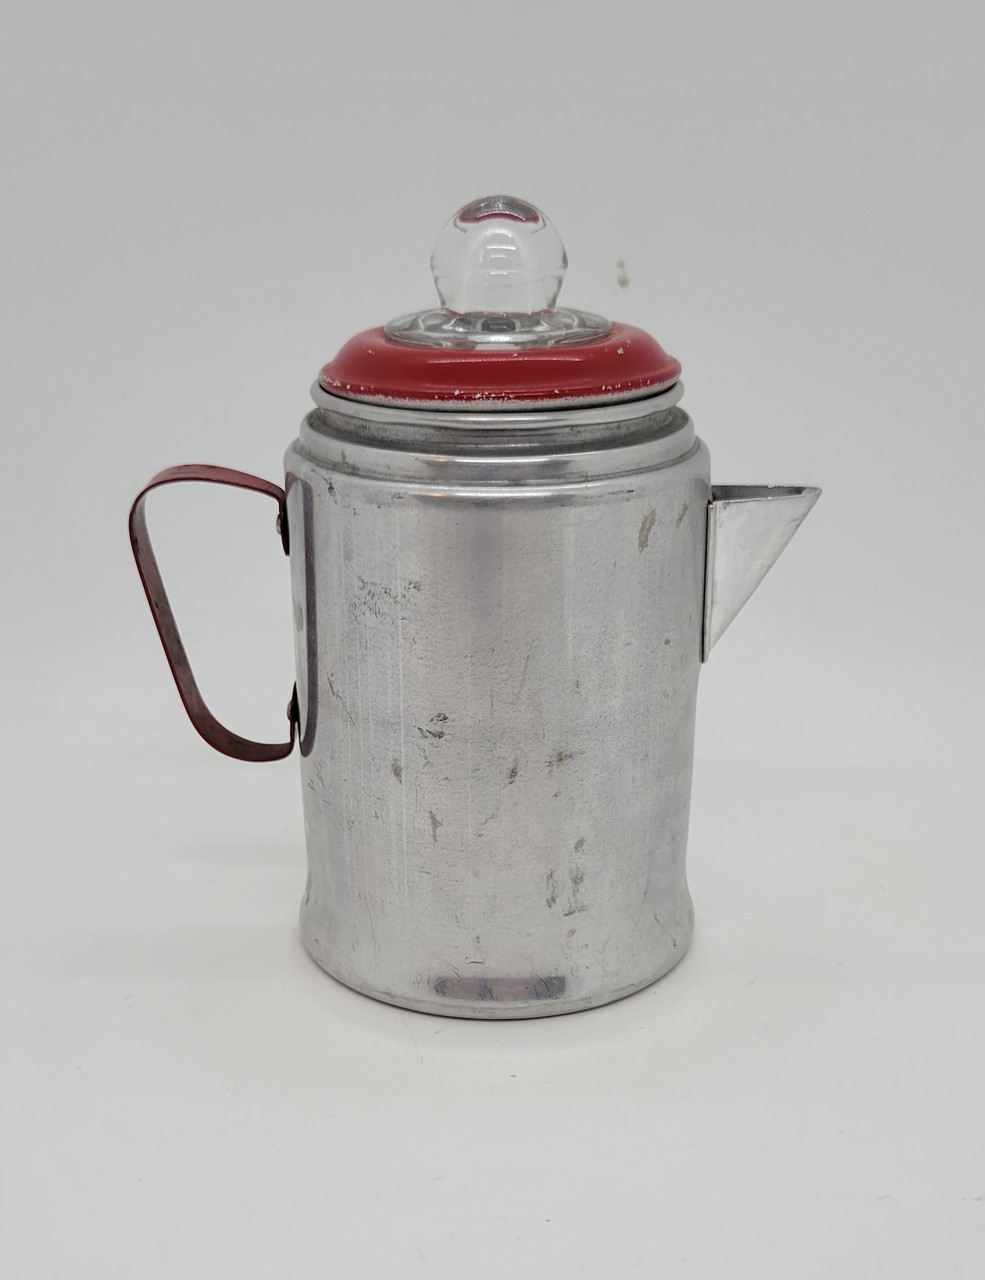 1940's Percolator Coffee Pot still used for camping & home : r